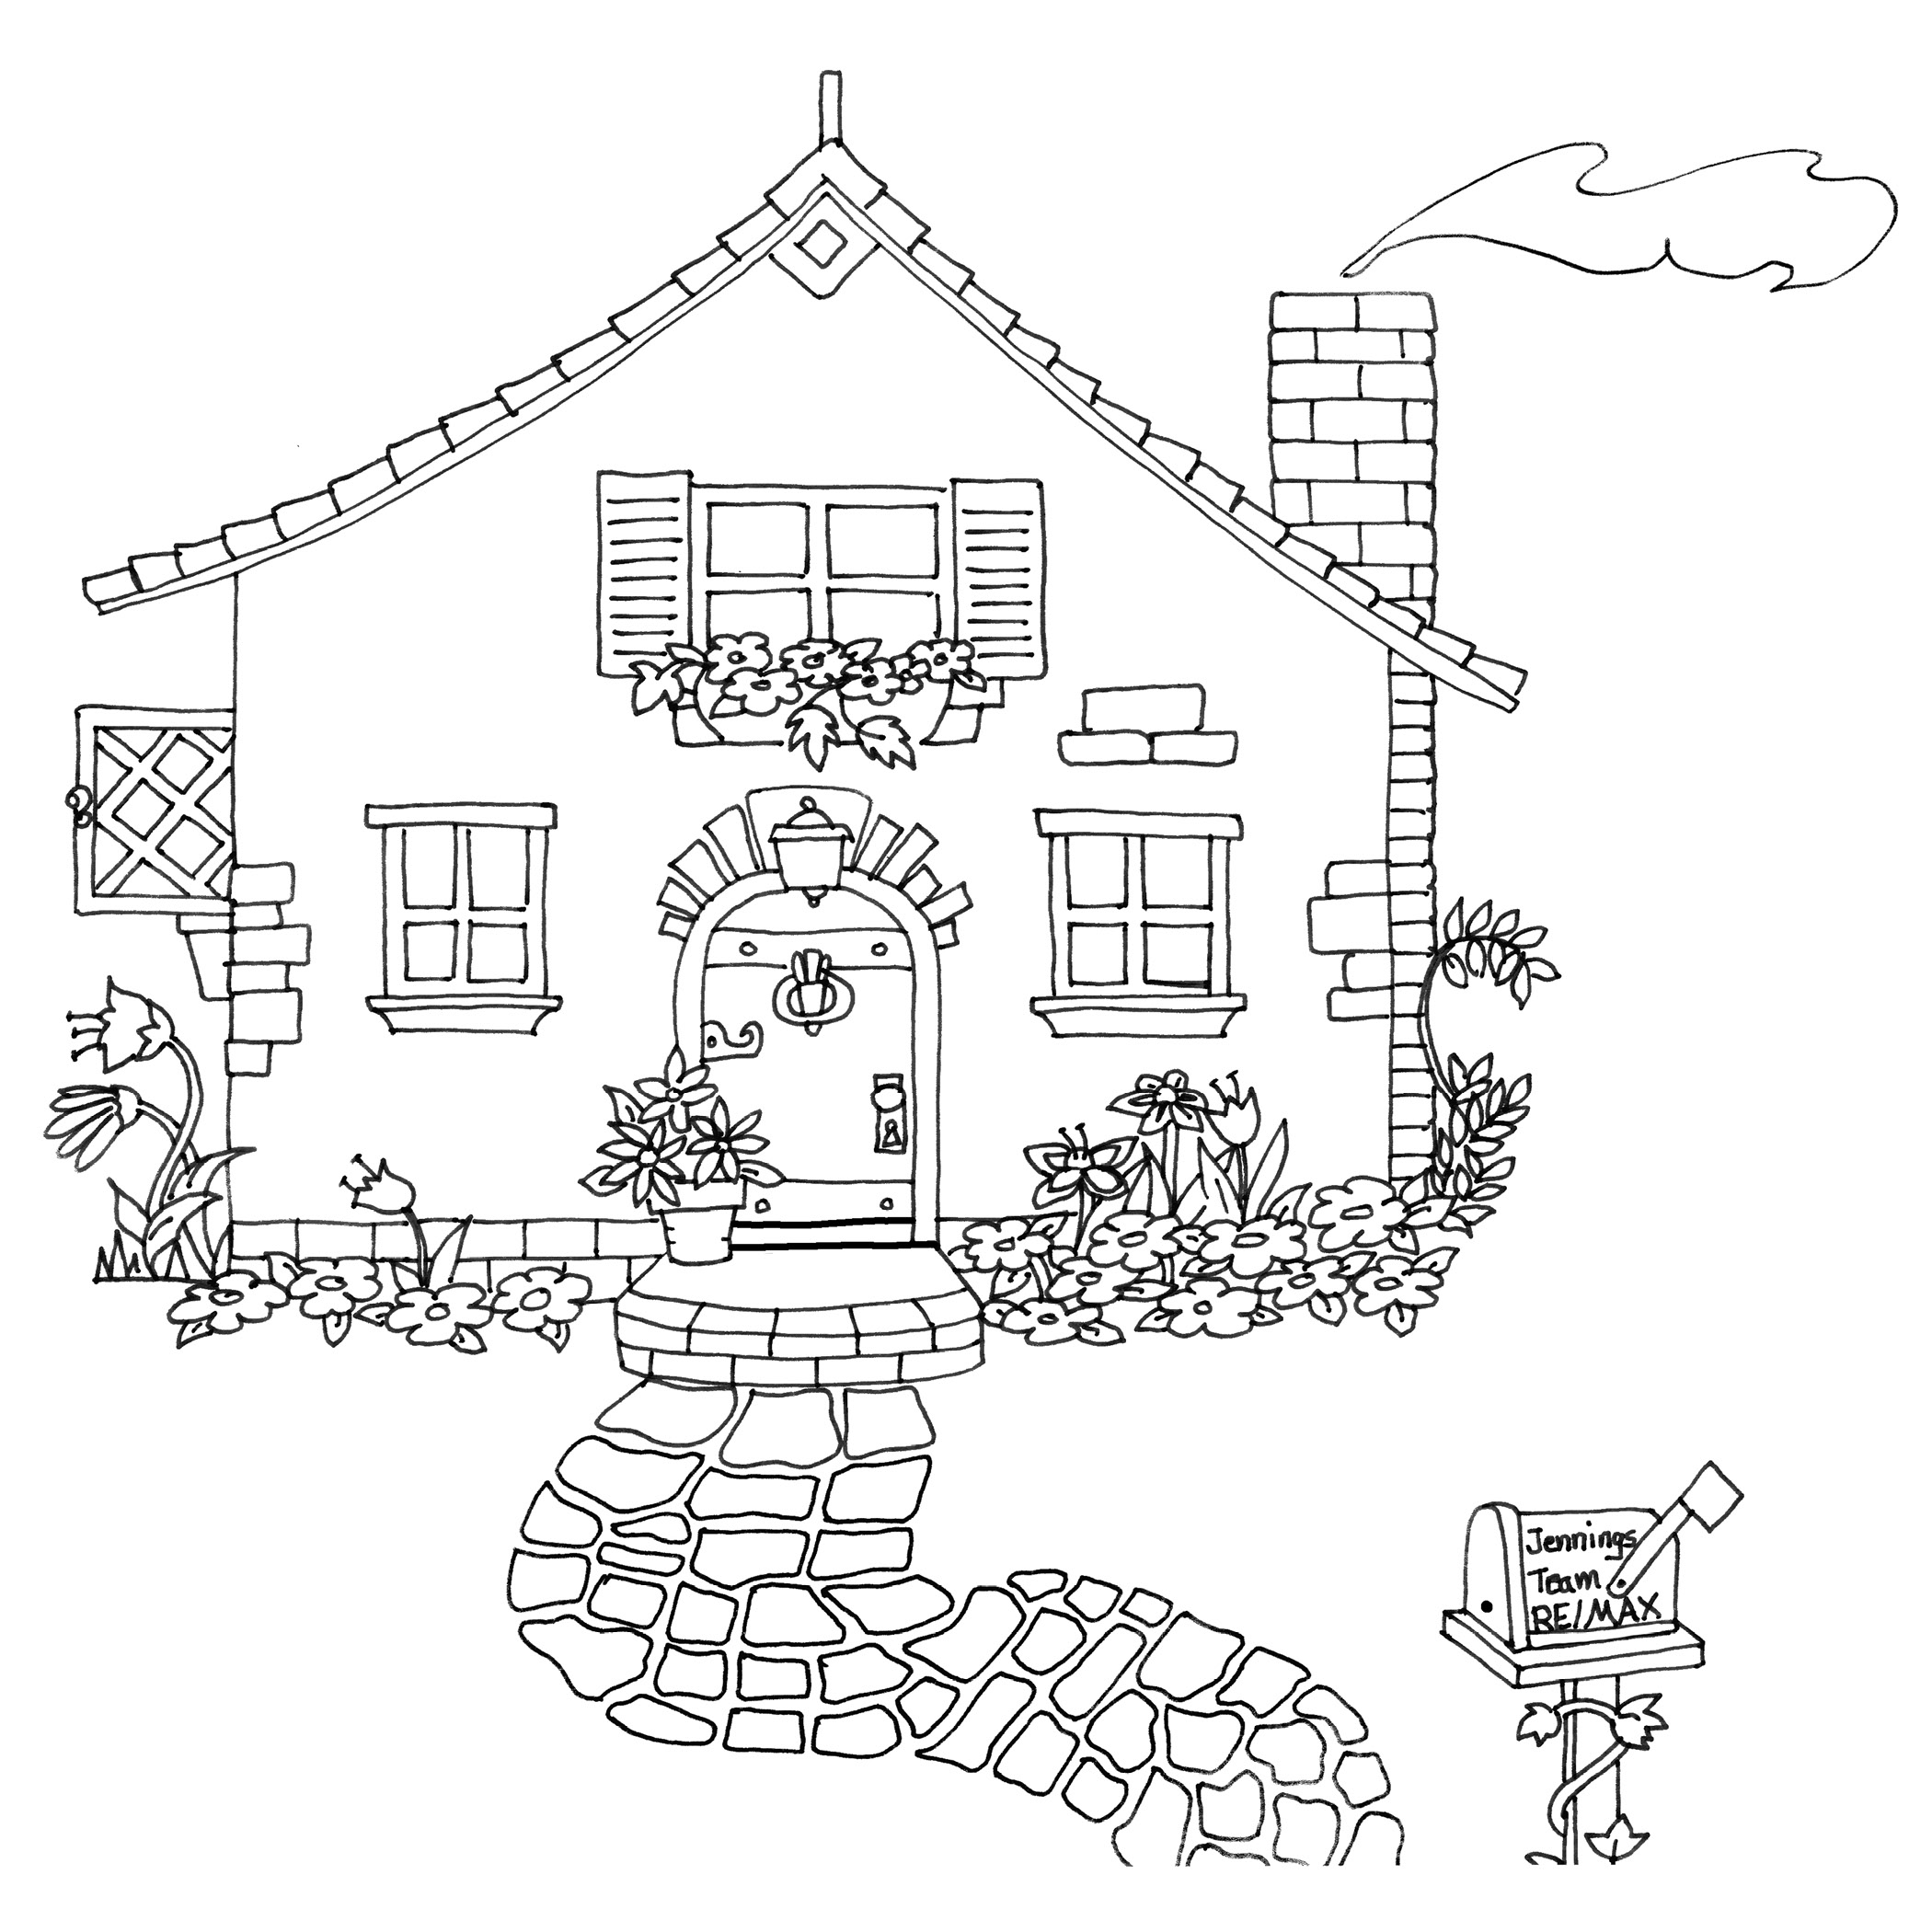 coloring contest